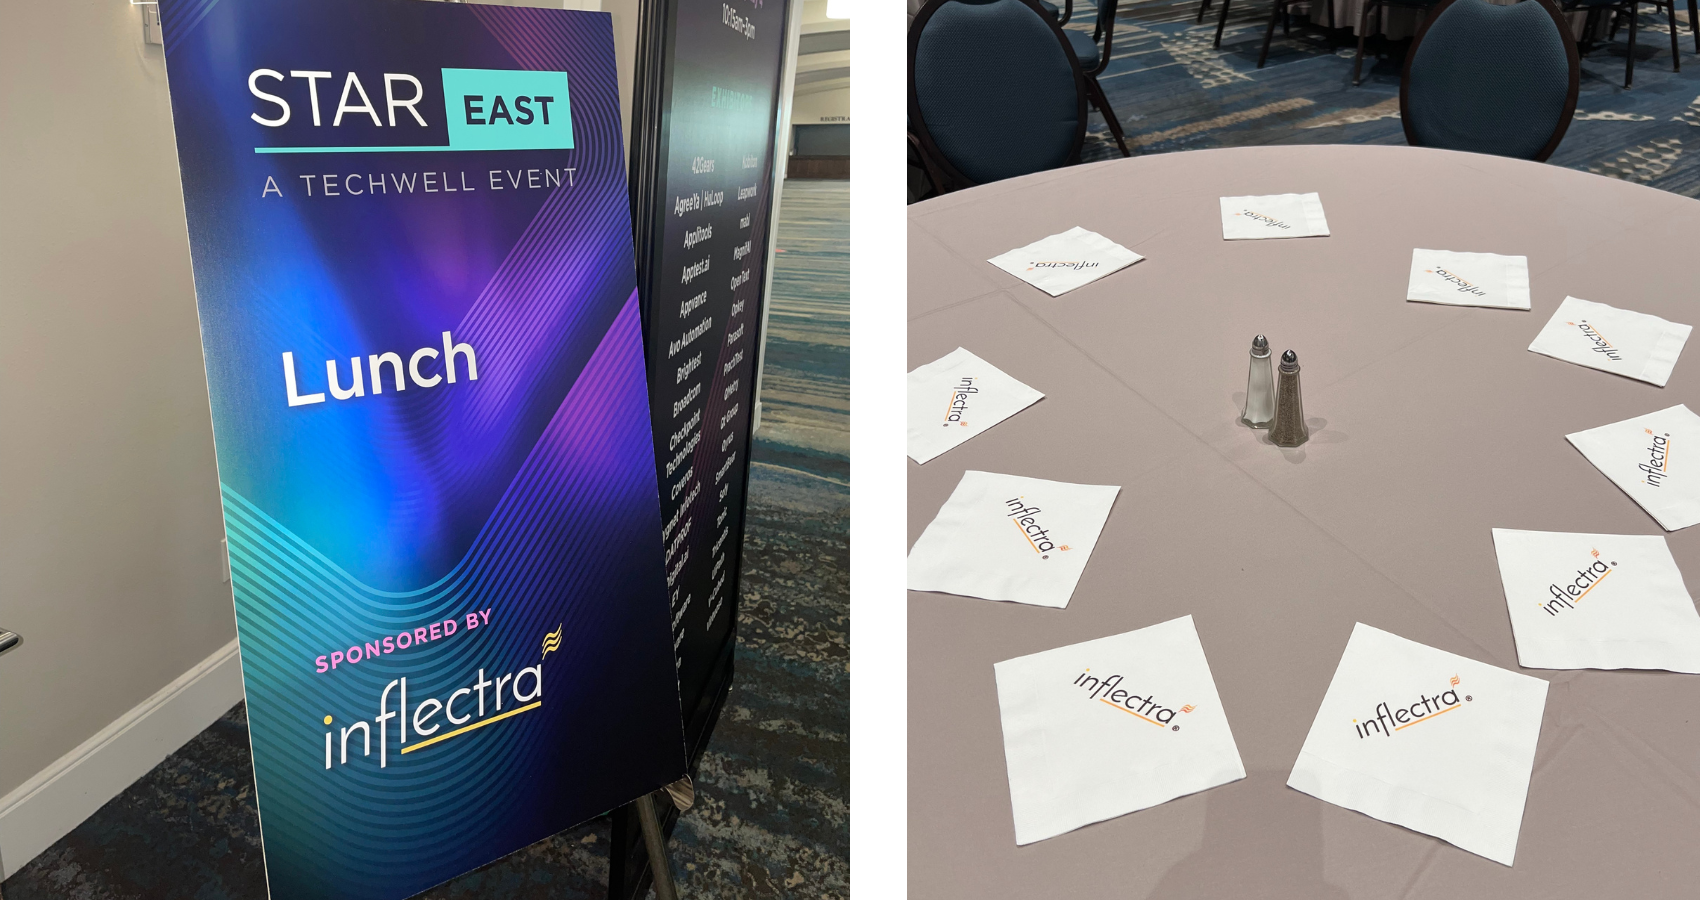 inflectra-sponsors-lunch-techwells-stareast-conference-image